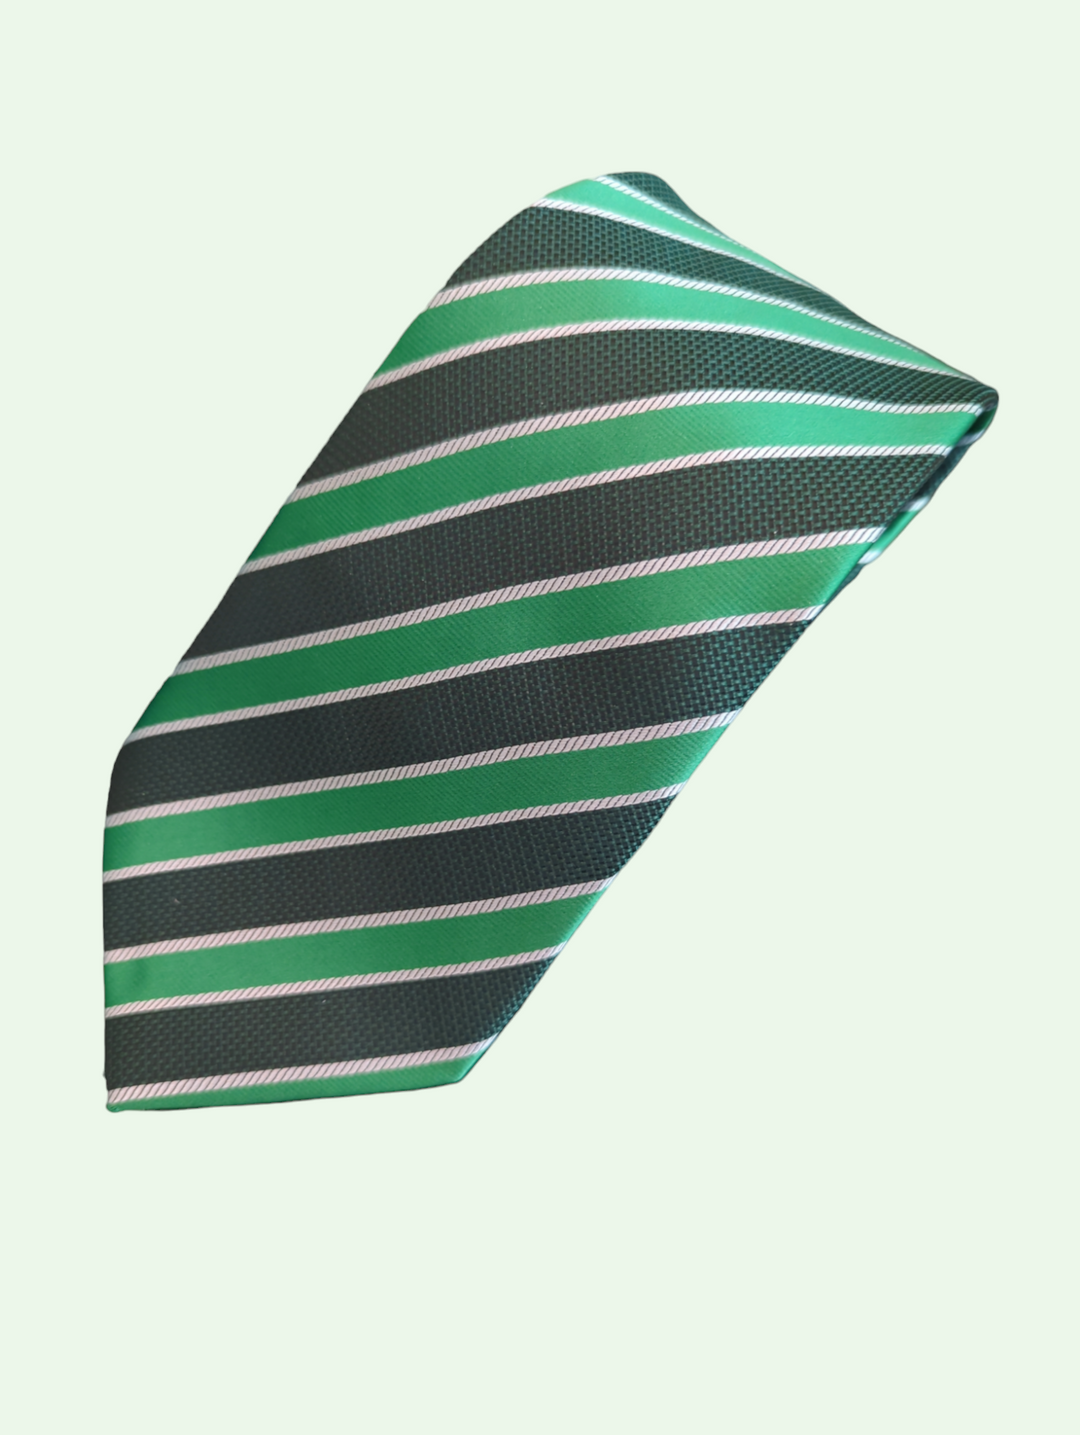 a studio shot of the jacquard stripe tie with its alternating kelly, olive and white stripes